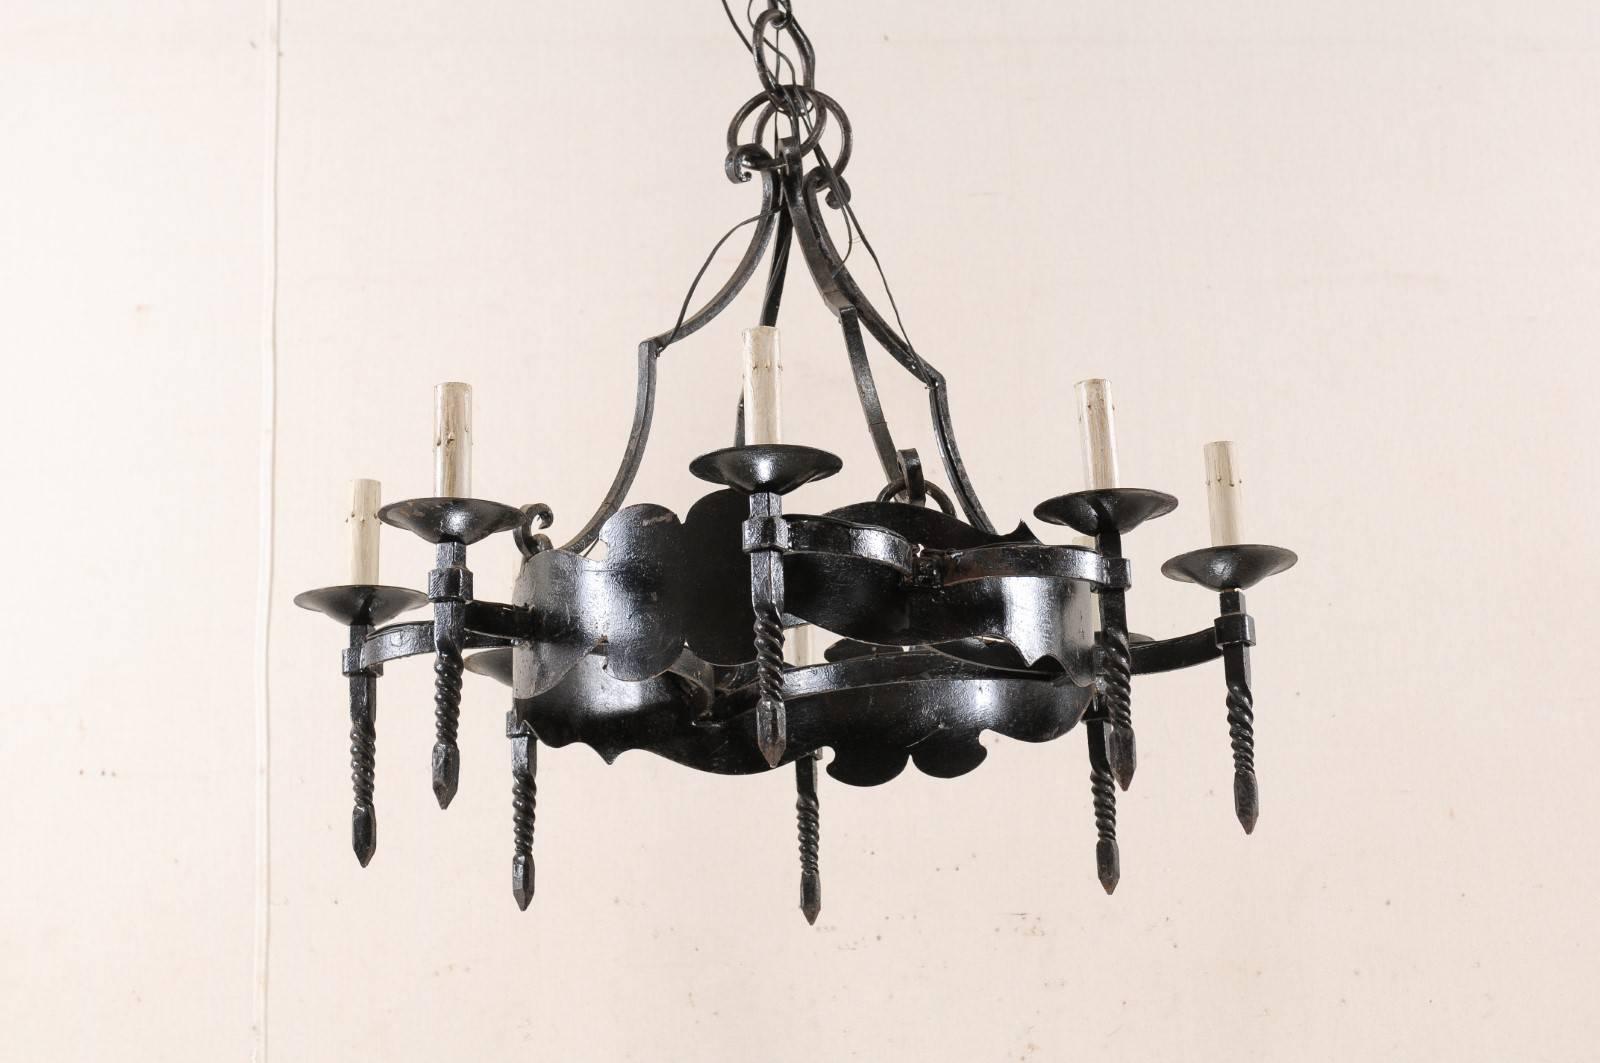 A French circular iron eight-light chandelier from the mid-20th century. This vintage French hand-forged iron chandelier features a wide central ring base with stylized cut-wave motifs along it's upper and lower edges. There are eight torch-style